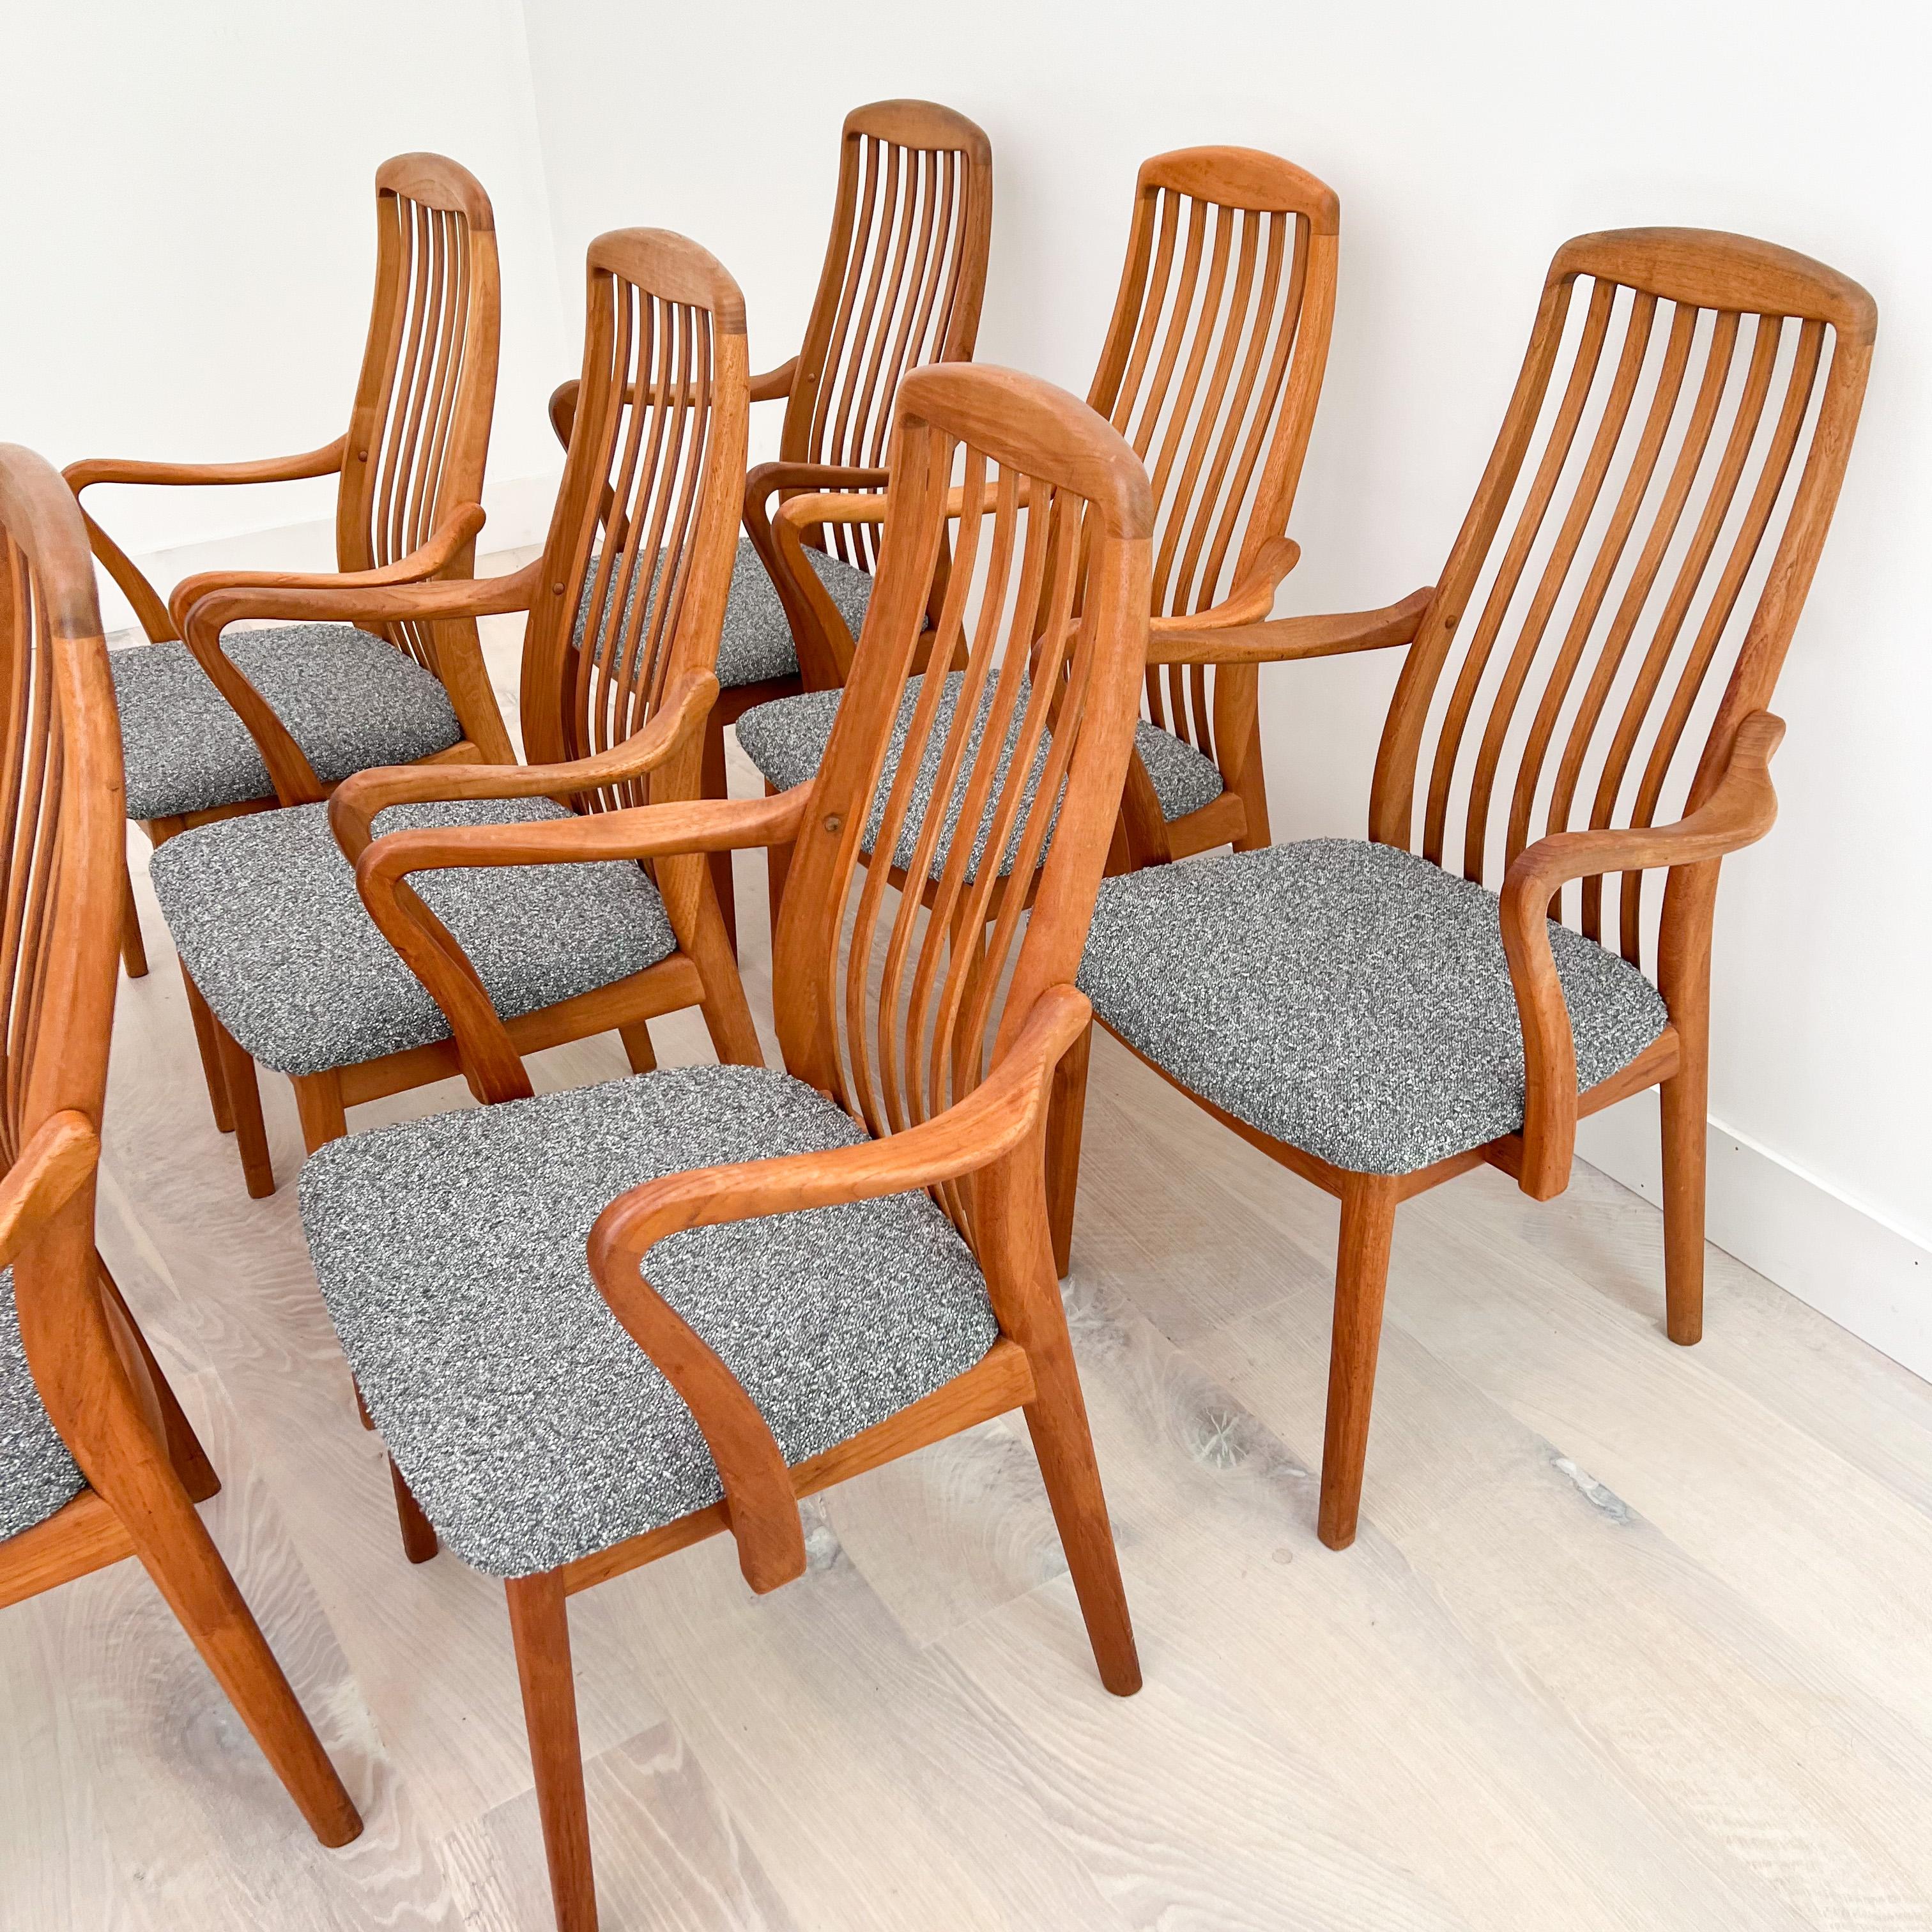 Set of 8 Danish Teak Dining Chairs with New Upholstery by Virsidan A/S 1